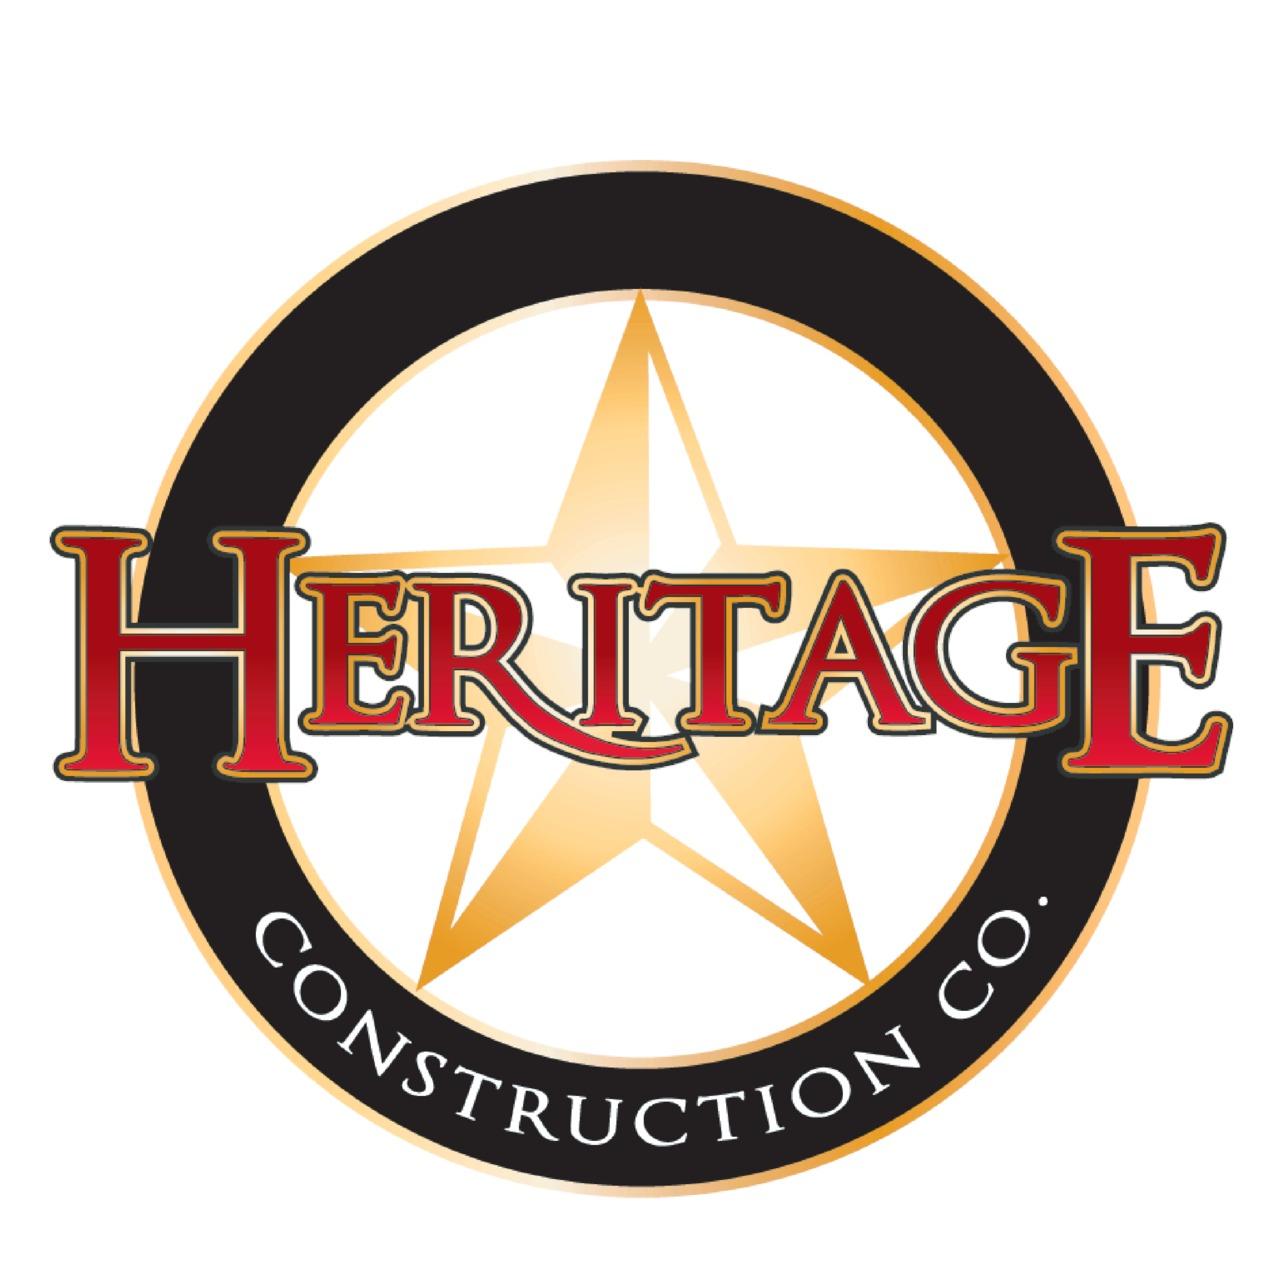 Heritage Construction Co.